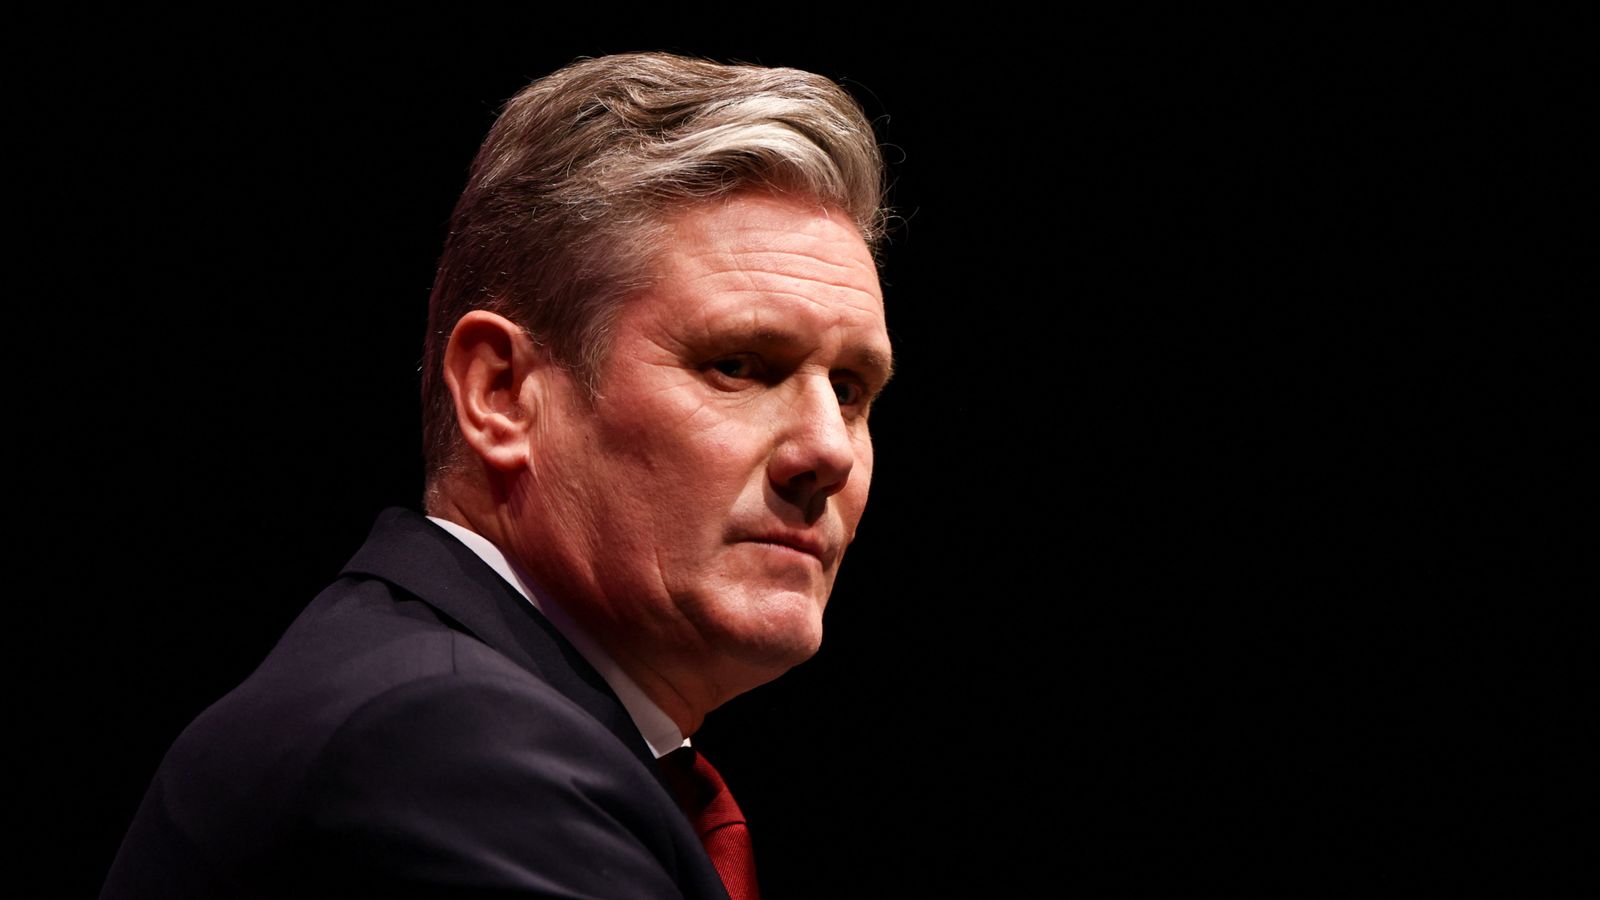 Many voters don't know what Labour stand for. Today, Sir Keir Starmer will try to change that